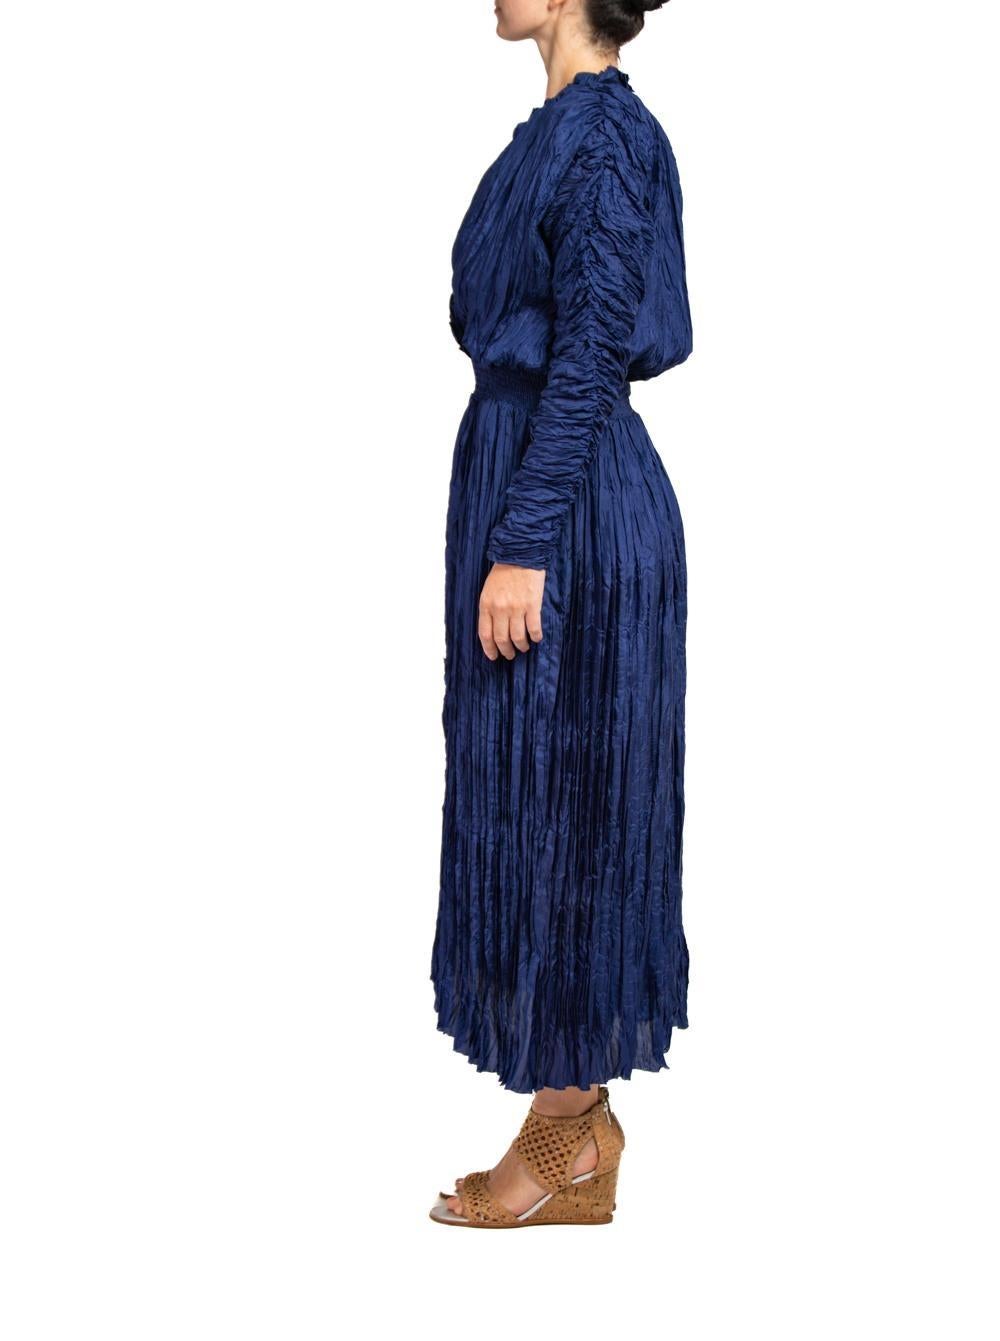 1980S HANNA HARTWELL Blue Long Sleeve With Elastic Waist Band  Dress In Excellent Condition For Sale In New York, NY